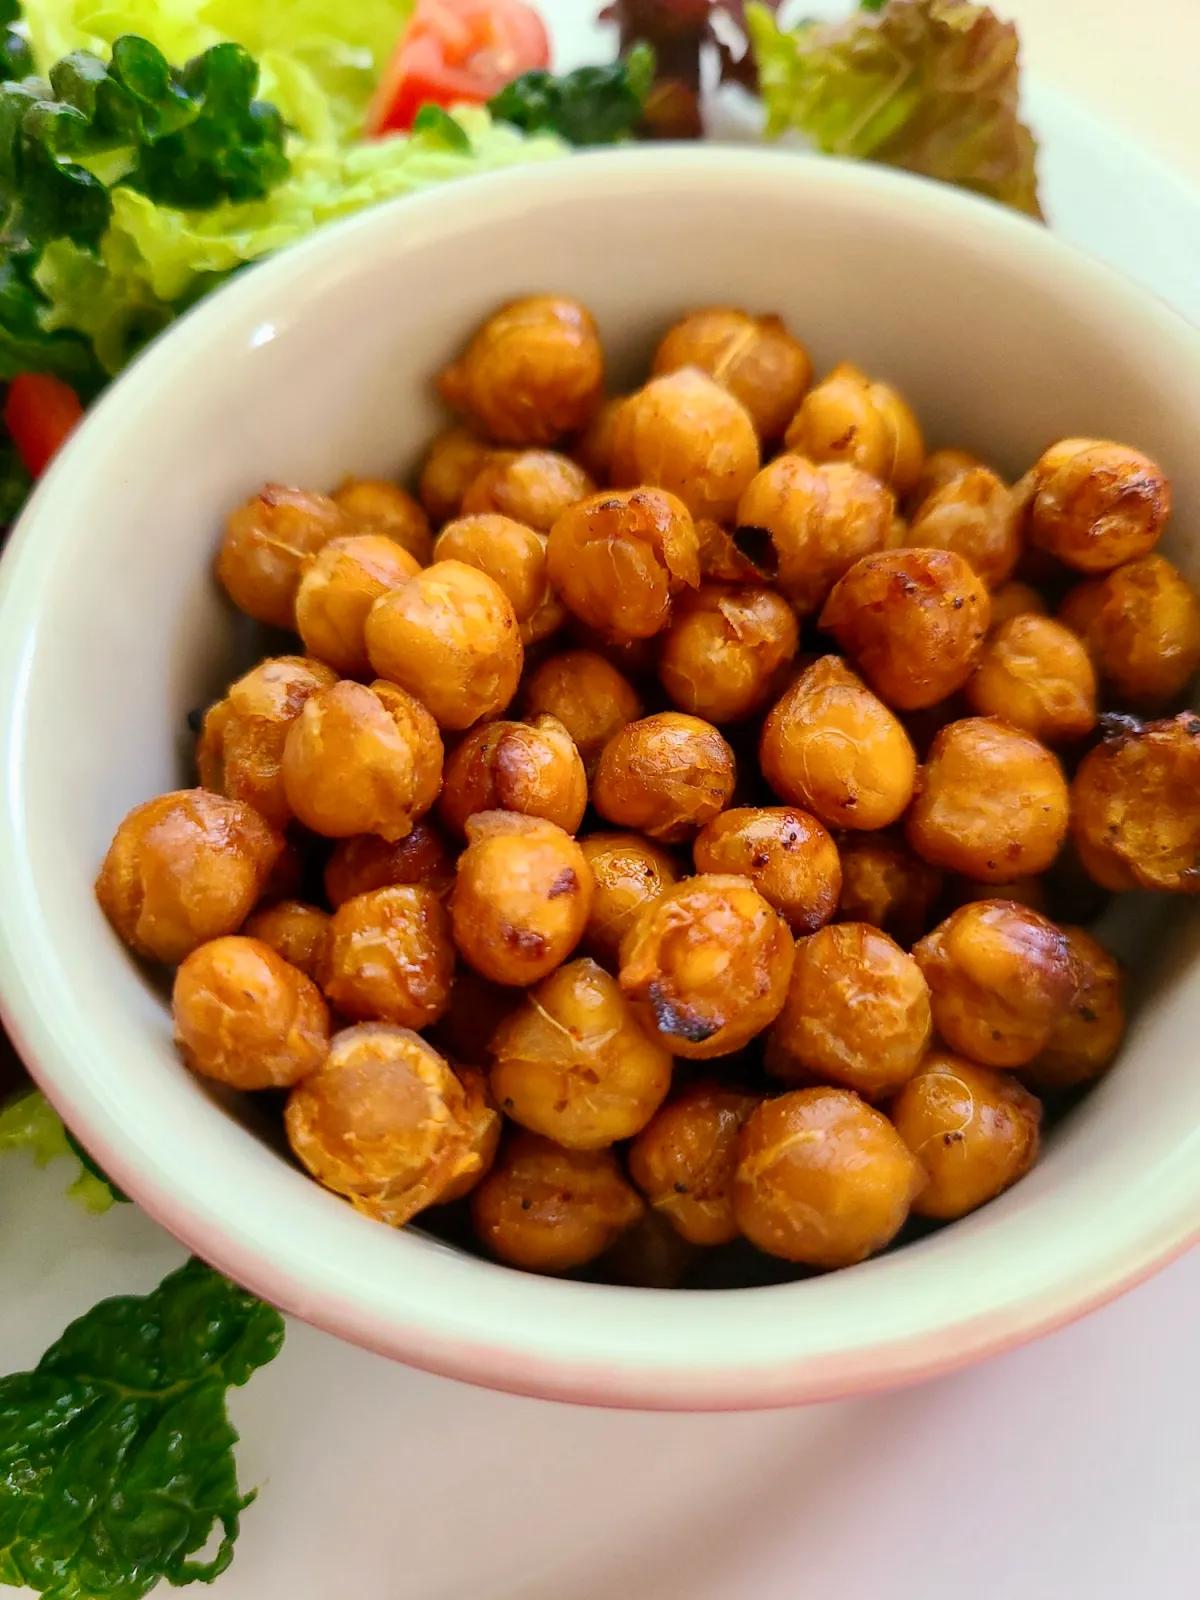 roasted chickpeas smoked paprika - Is it healthy to eat roasted chickpeas